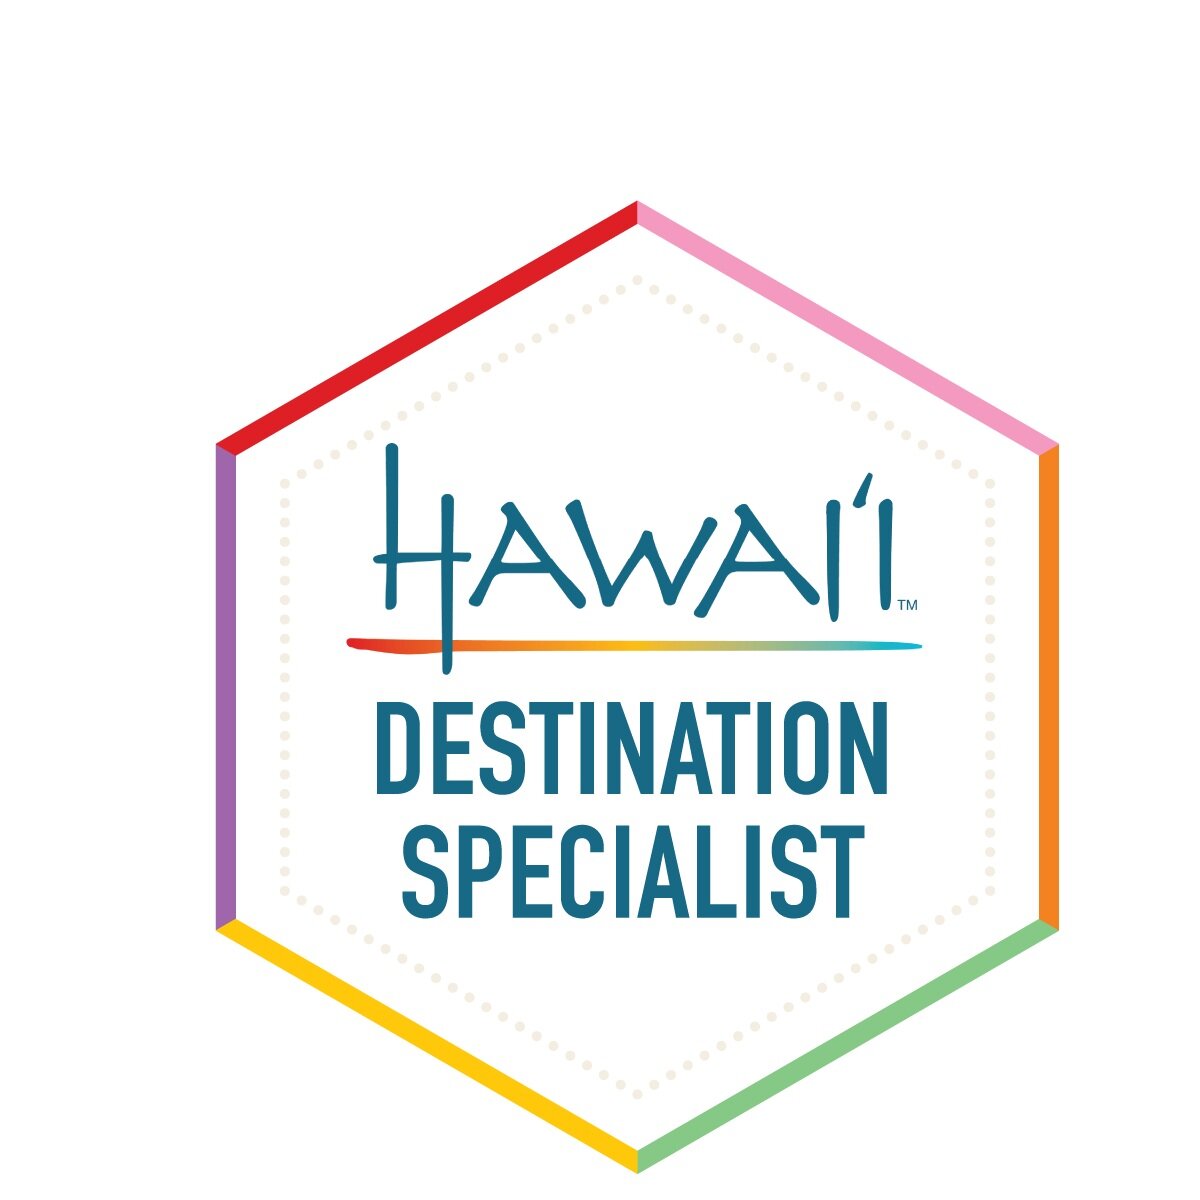 Visiting+Hawaii+with+kids-Destination+Specialist